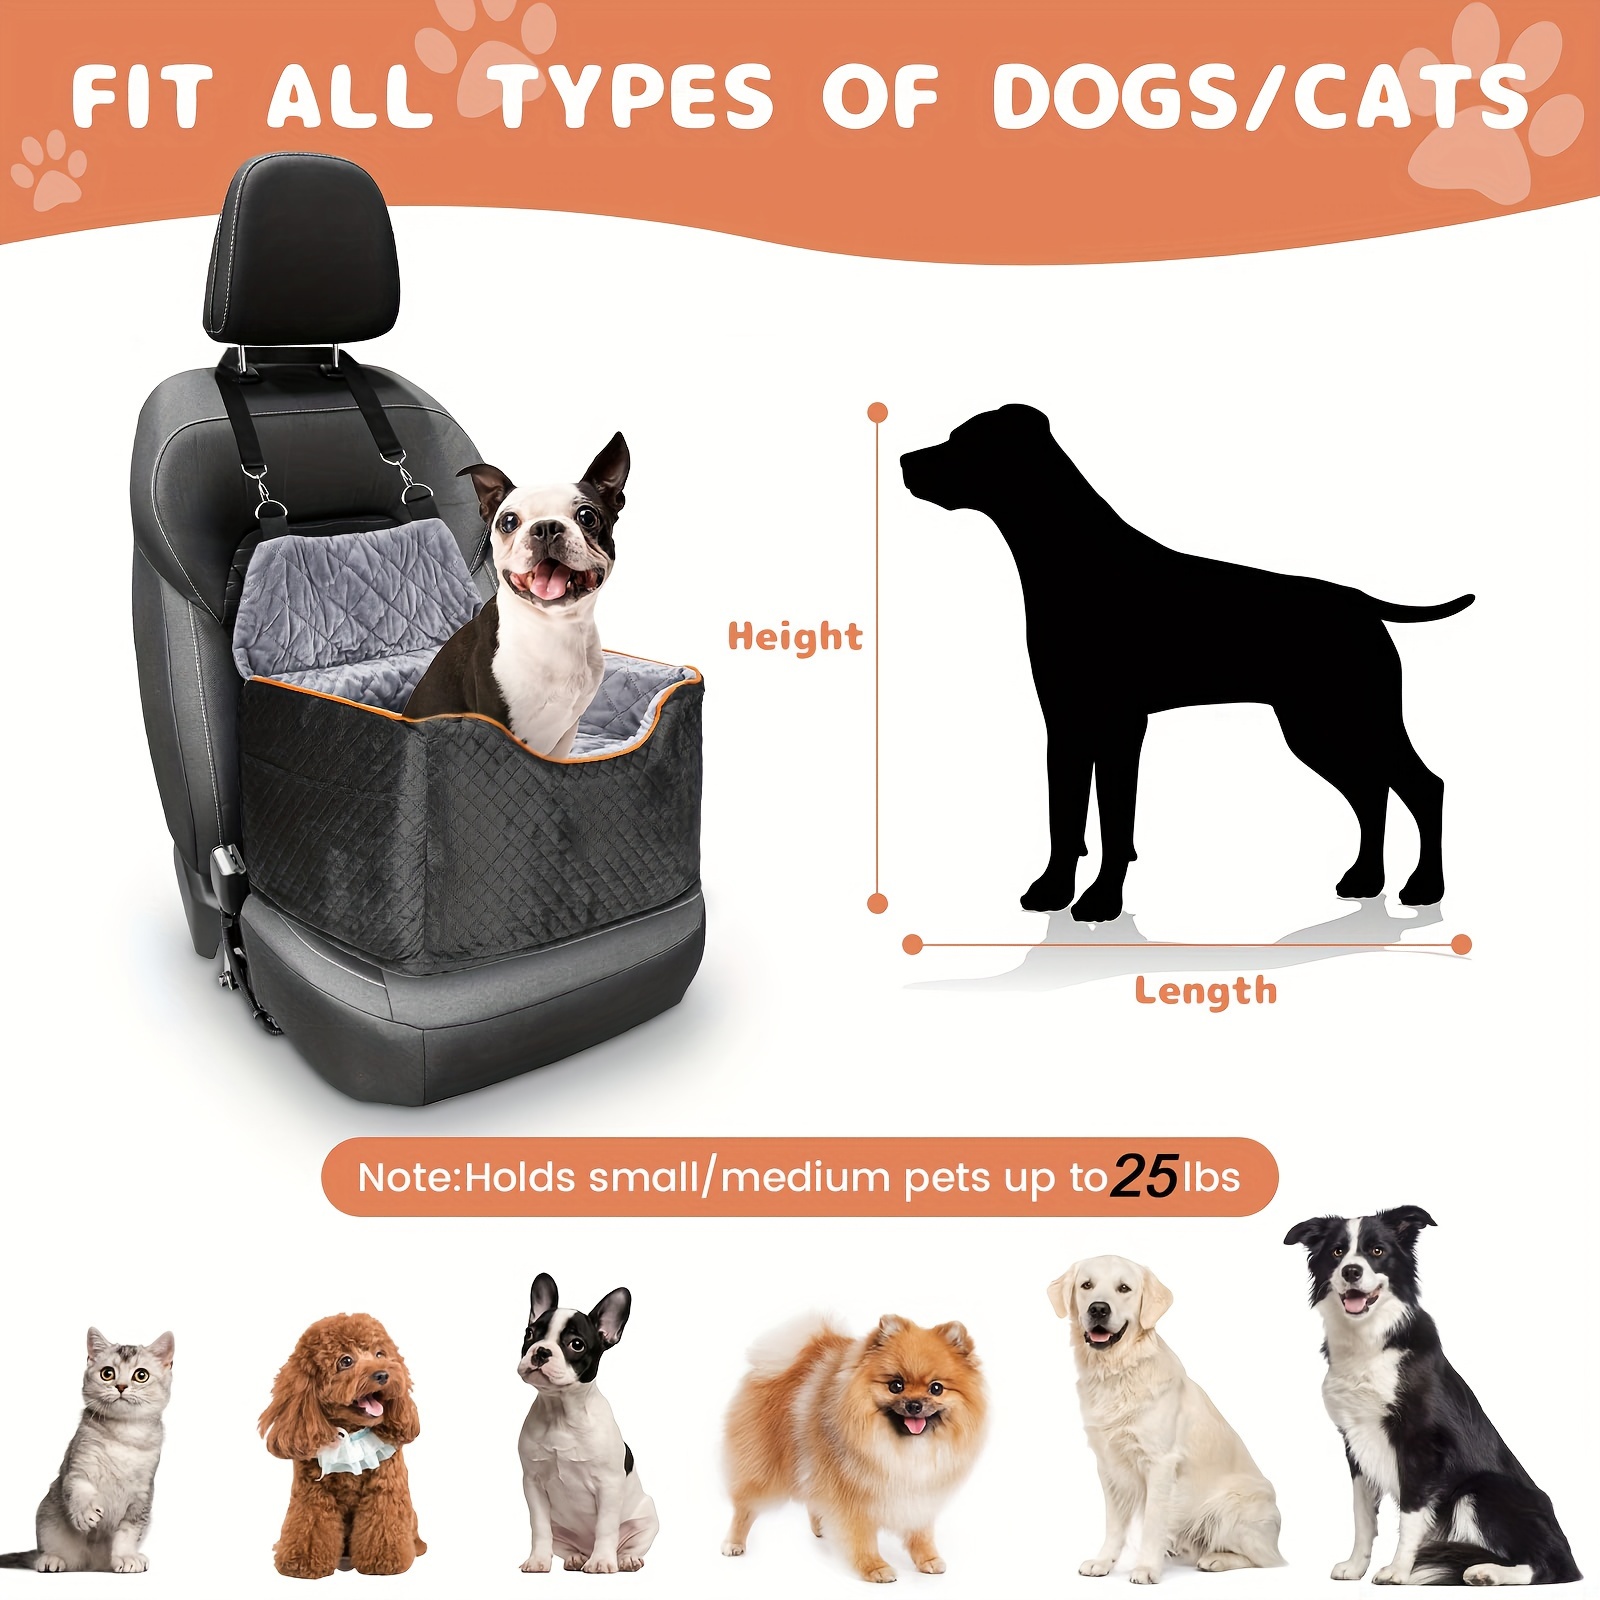 Dog Car Seat - Memory Foam Dog Booster Seat for Small Dogs Up to  25lbs-Elevated Pet Car Seat with Storage Pockets and Dog Seat Belt-Soft Pet  Travel